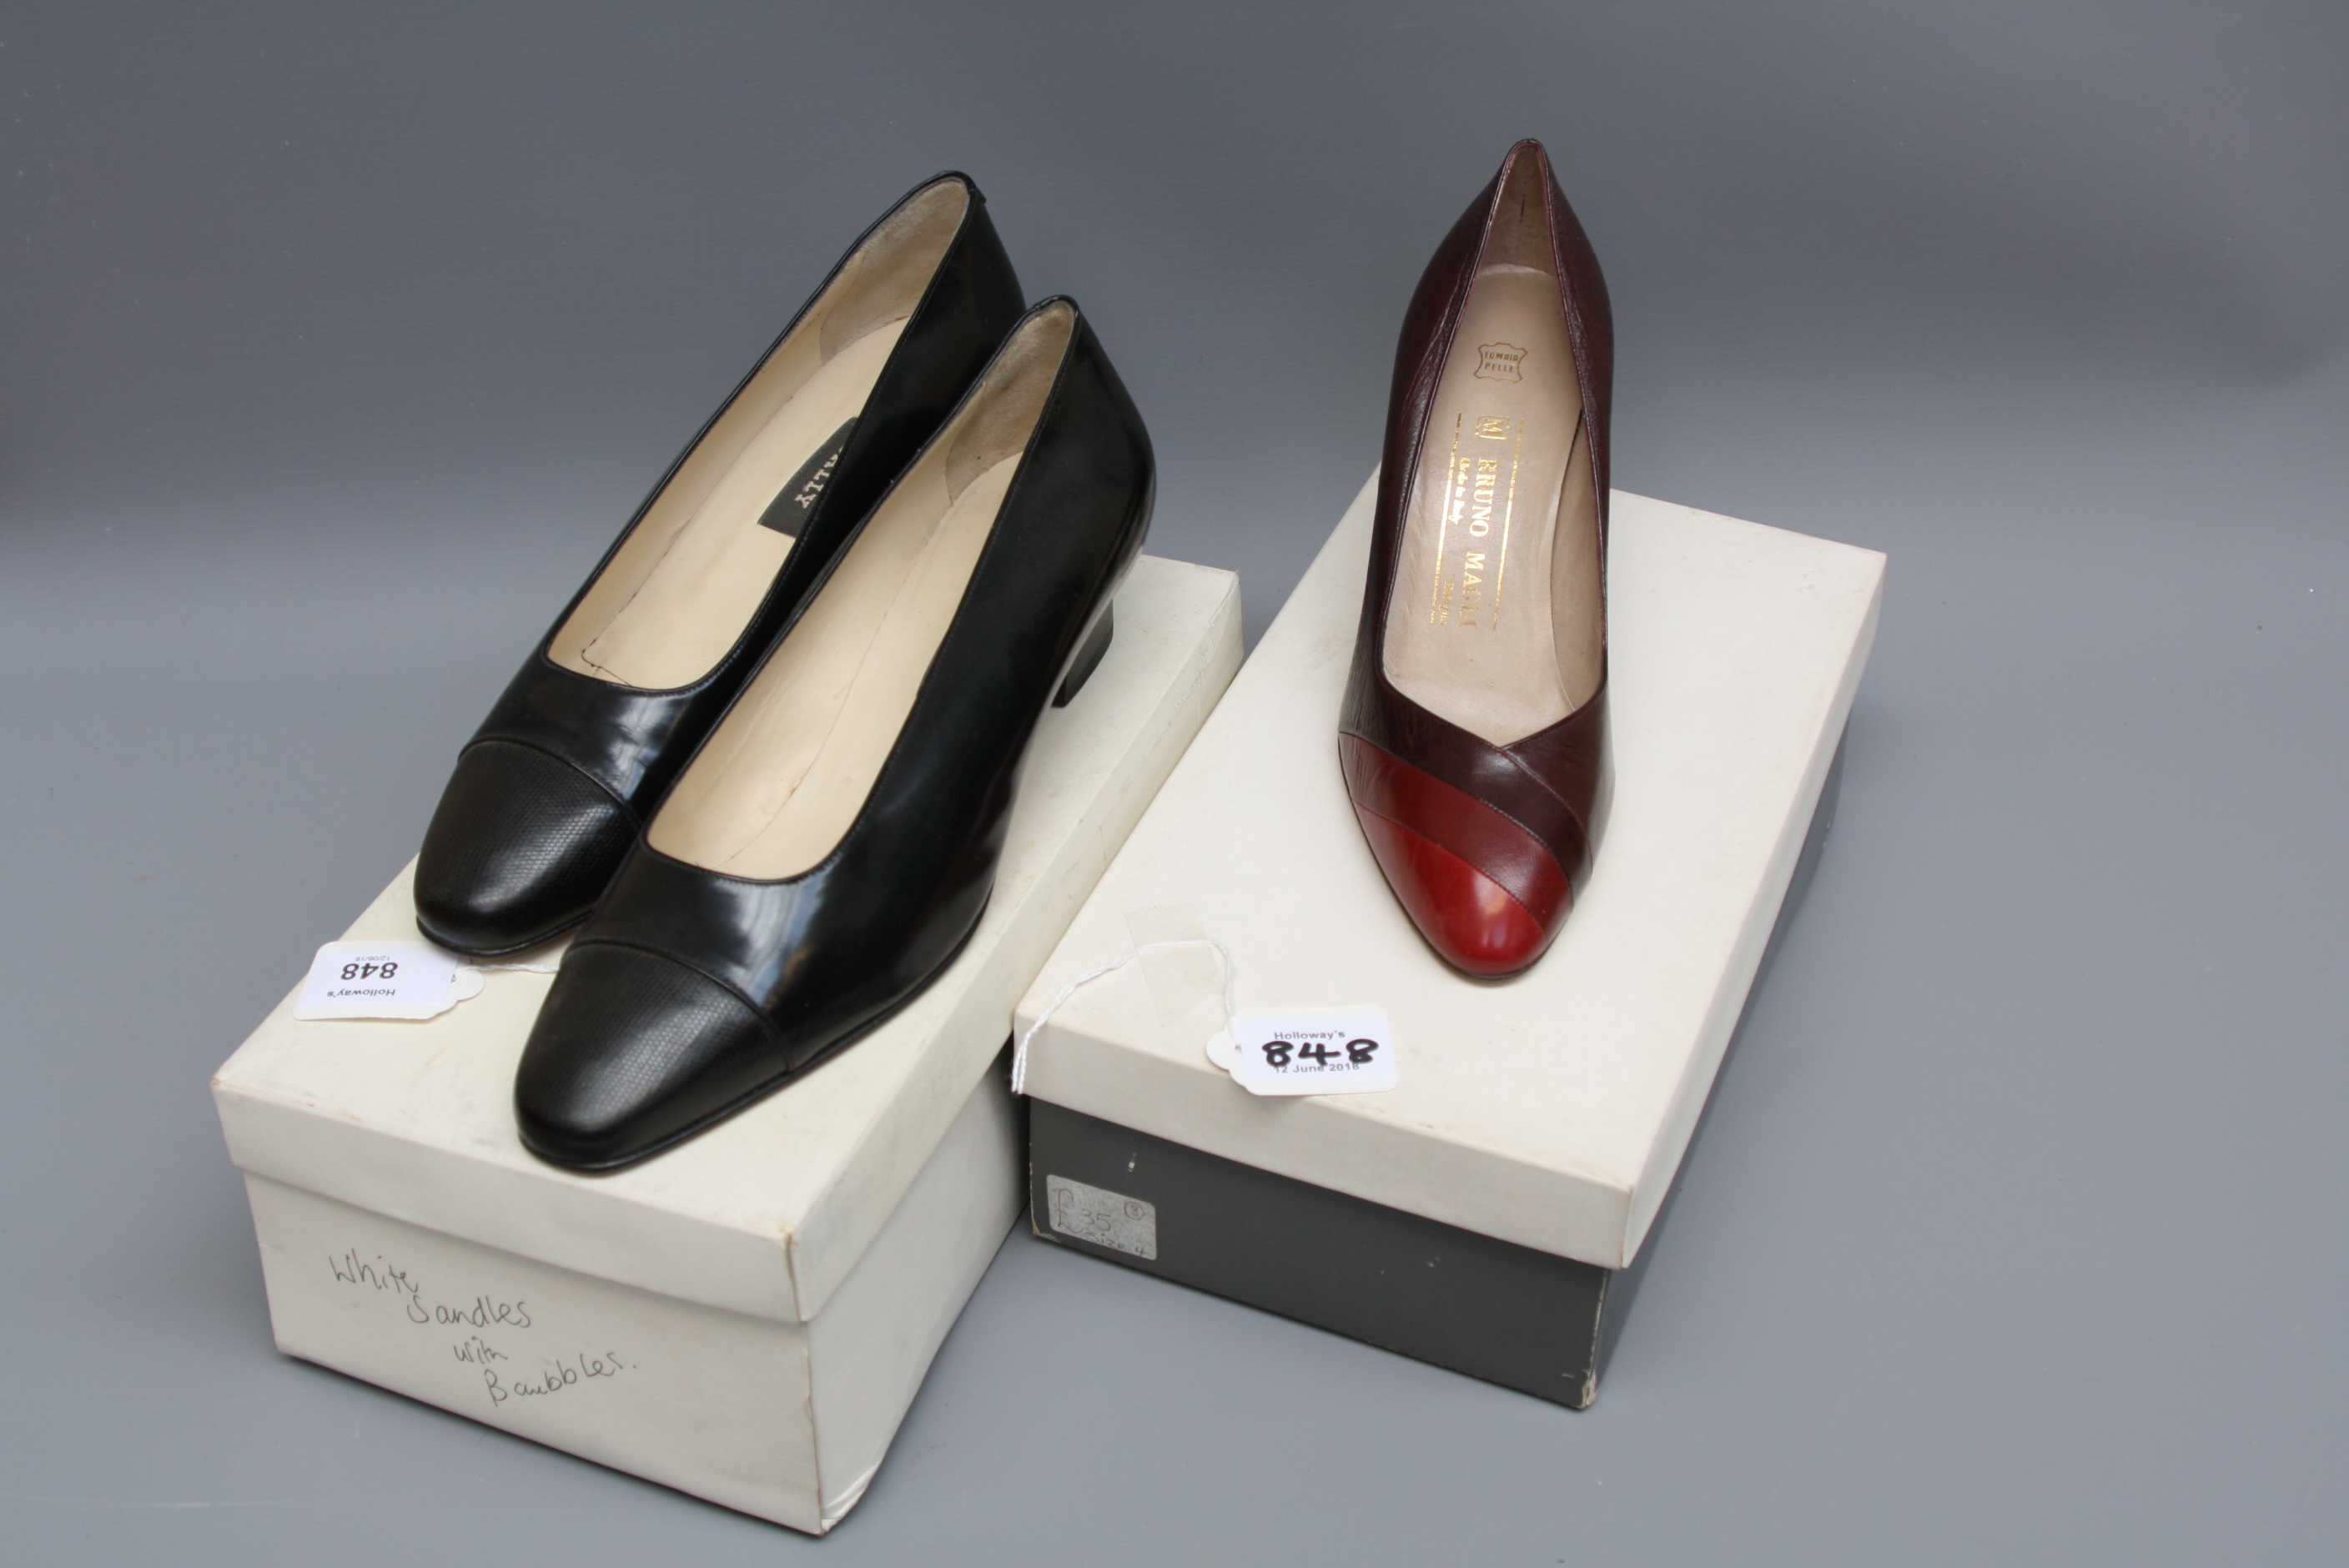 A pair of burgundy Bruno Magli court shoes together with a pair of black Bally low heel shoes